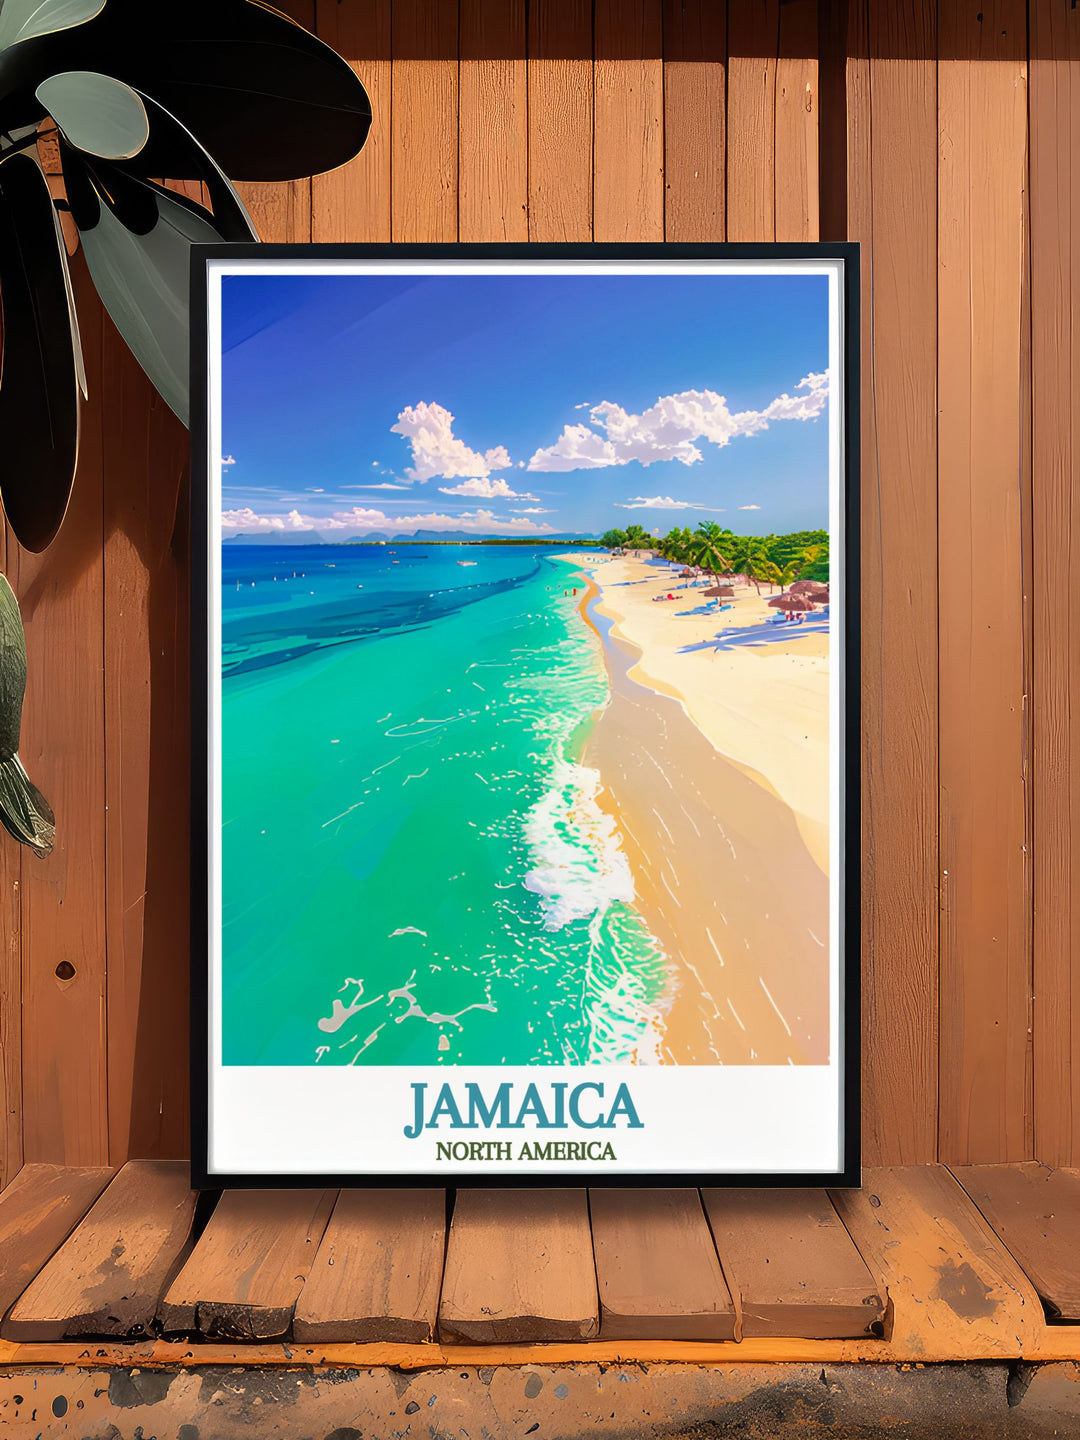 Highlighting the inviting waters and soft white sands of Seven Mile Beach, this travel poster is ideal for adding a touch of Caribbean charm to any room.